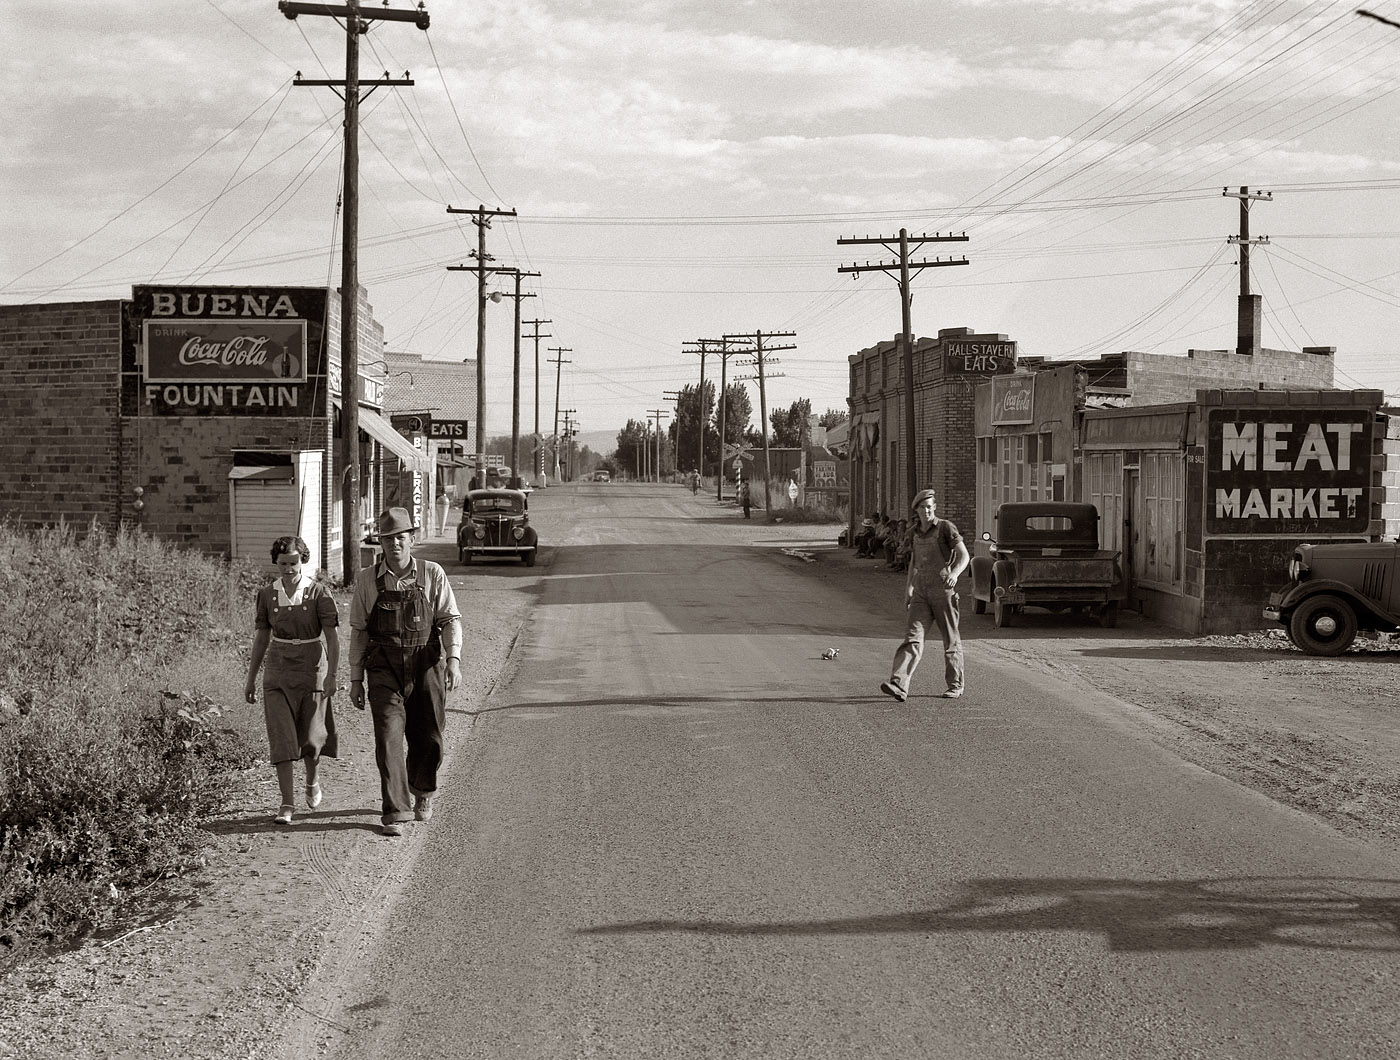 August 1939. "Buena, Yakima County, Washington. Yakima Valley small town whose county ranks fifth in the United States in value of agricultural production." 4x5 inch nitrate negative by Dorothea Lange for the Farm Security Administration. View full size.